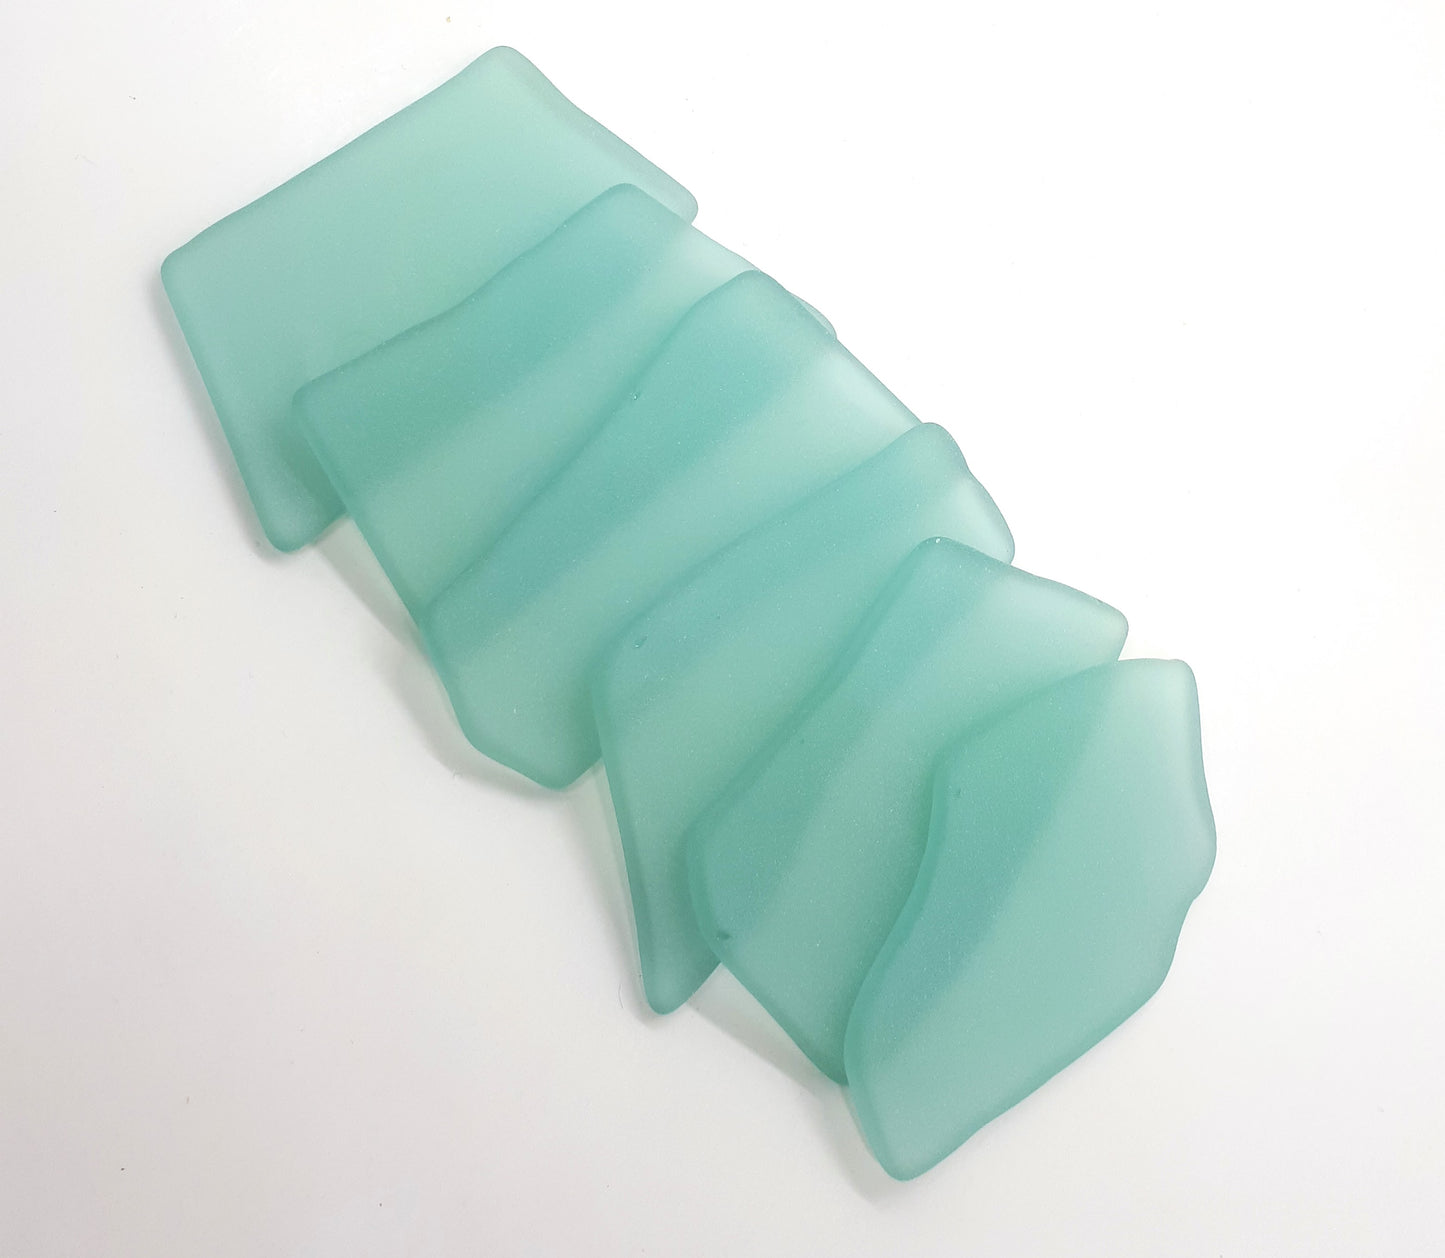 Sea green & teal sea glass place cards - Set of 20 - Irregular shaped pieces